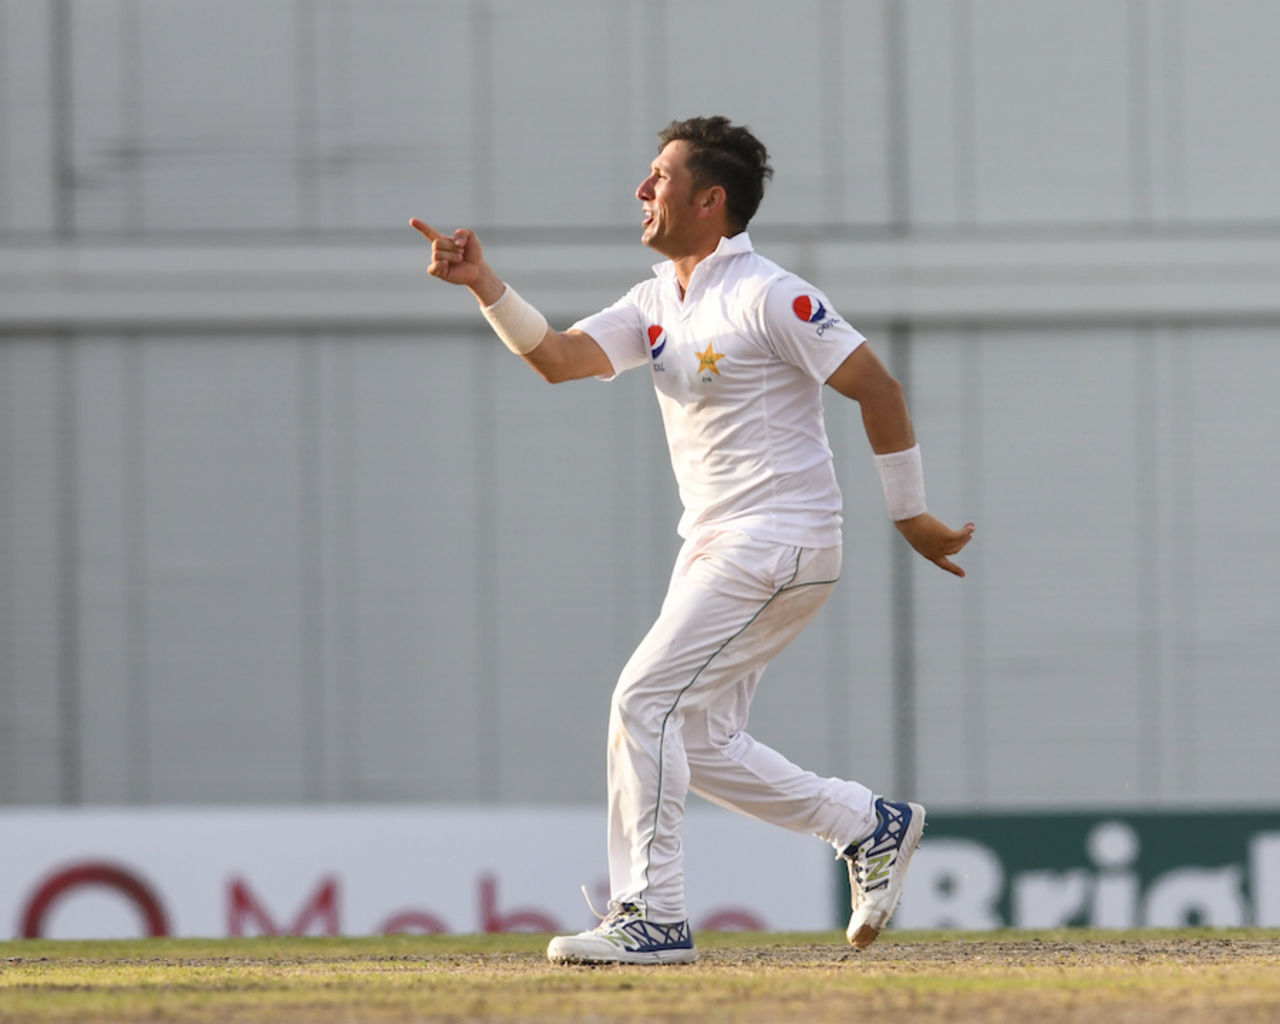 Yasir Shah reacts after picking up a wicket, West Indies v Pakistan, 2nd Test, Bridgetown, 4th day, May 3, 2017